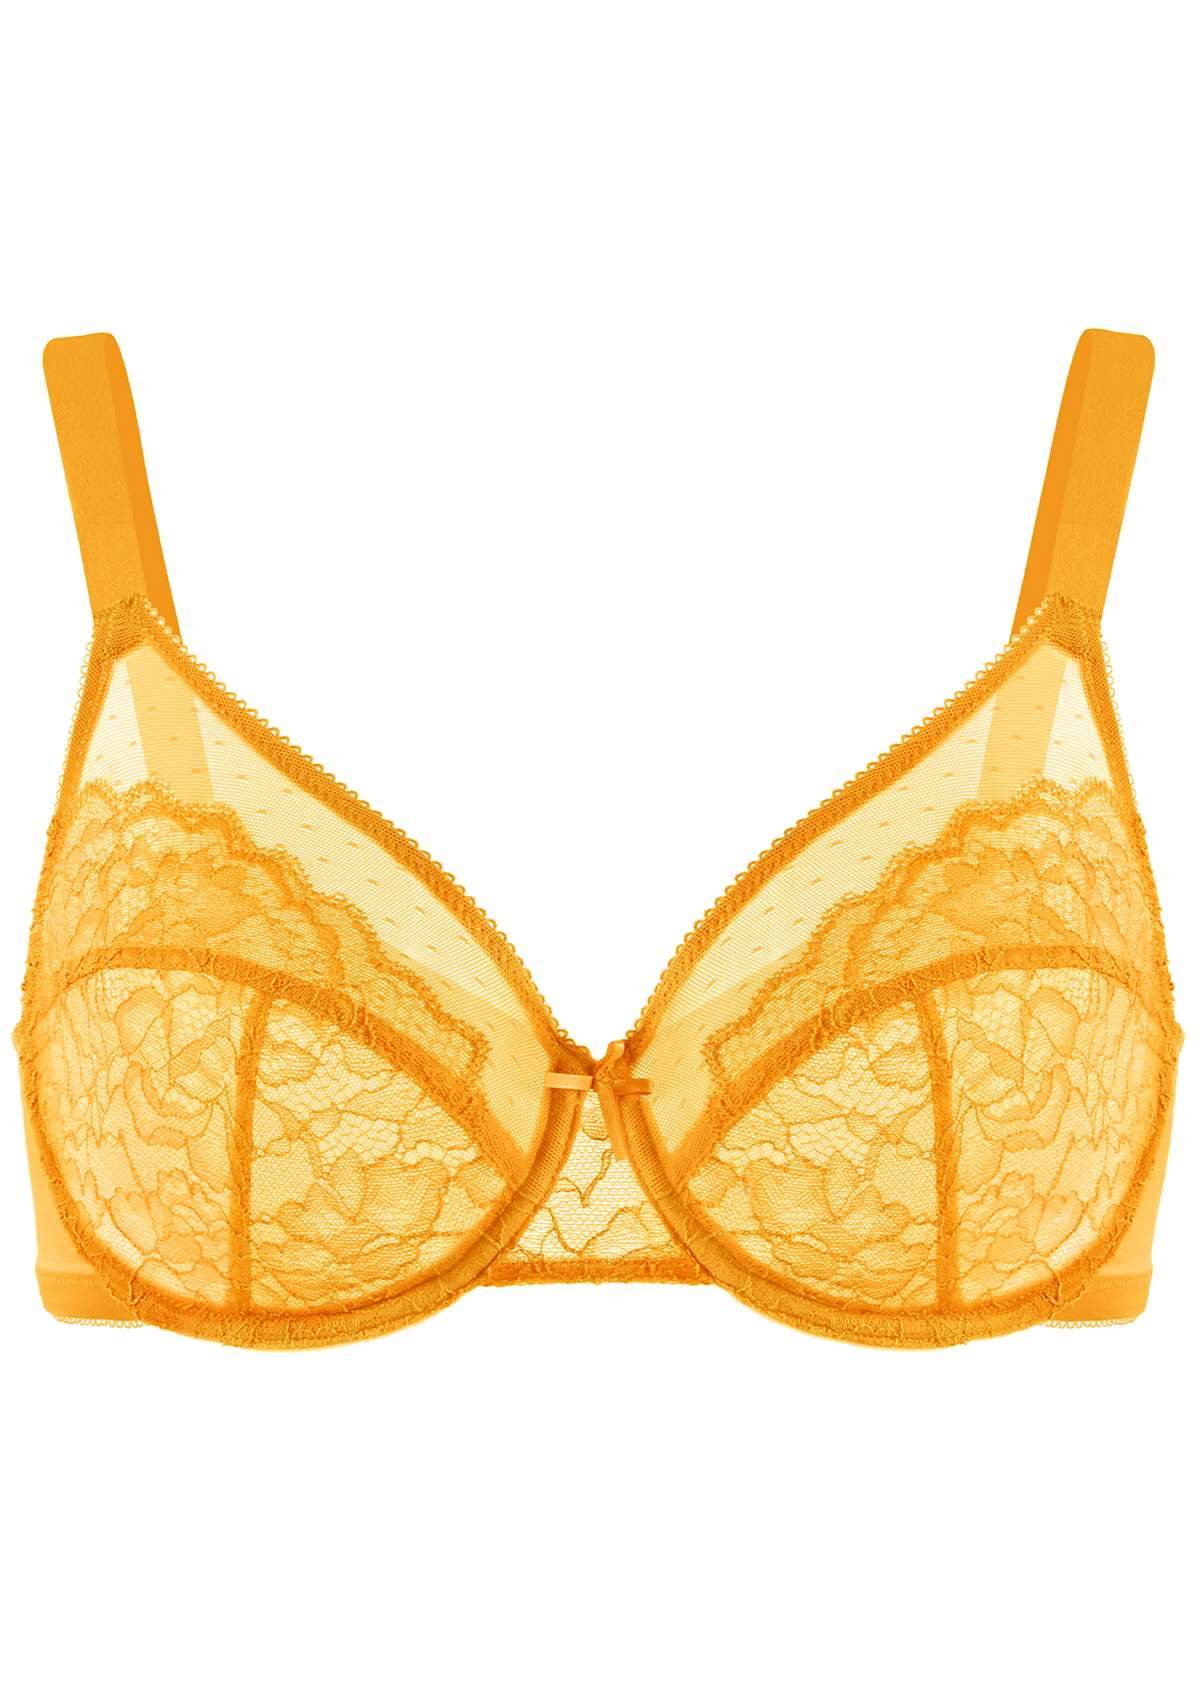 HSIA Enchante Bra And Panty Sets: Unpadded Bra With Back Support - Cadmium Yellow / 44 / C